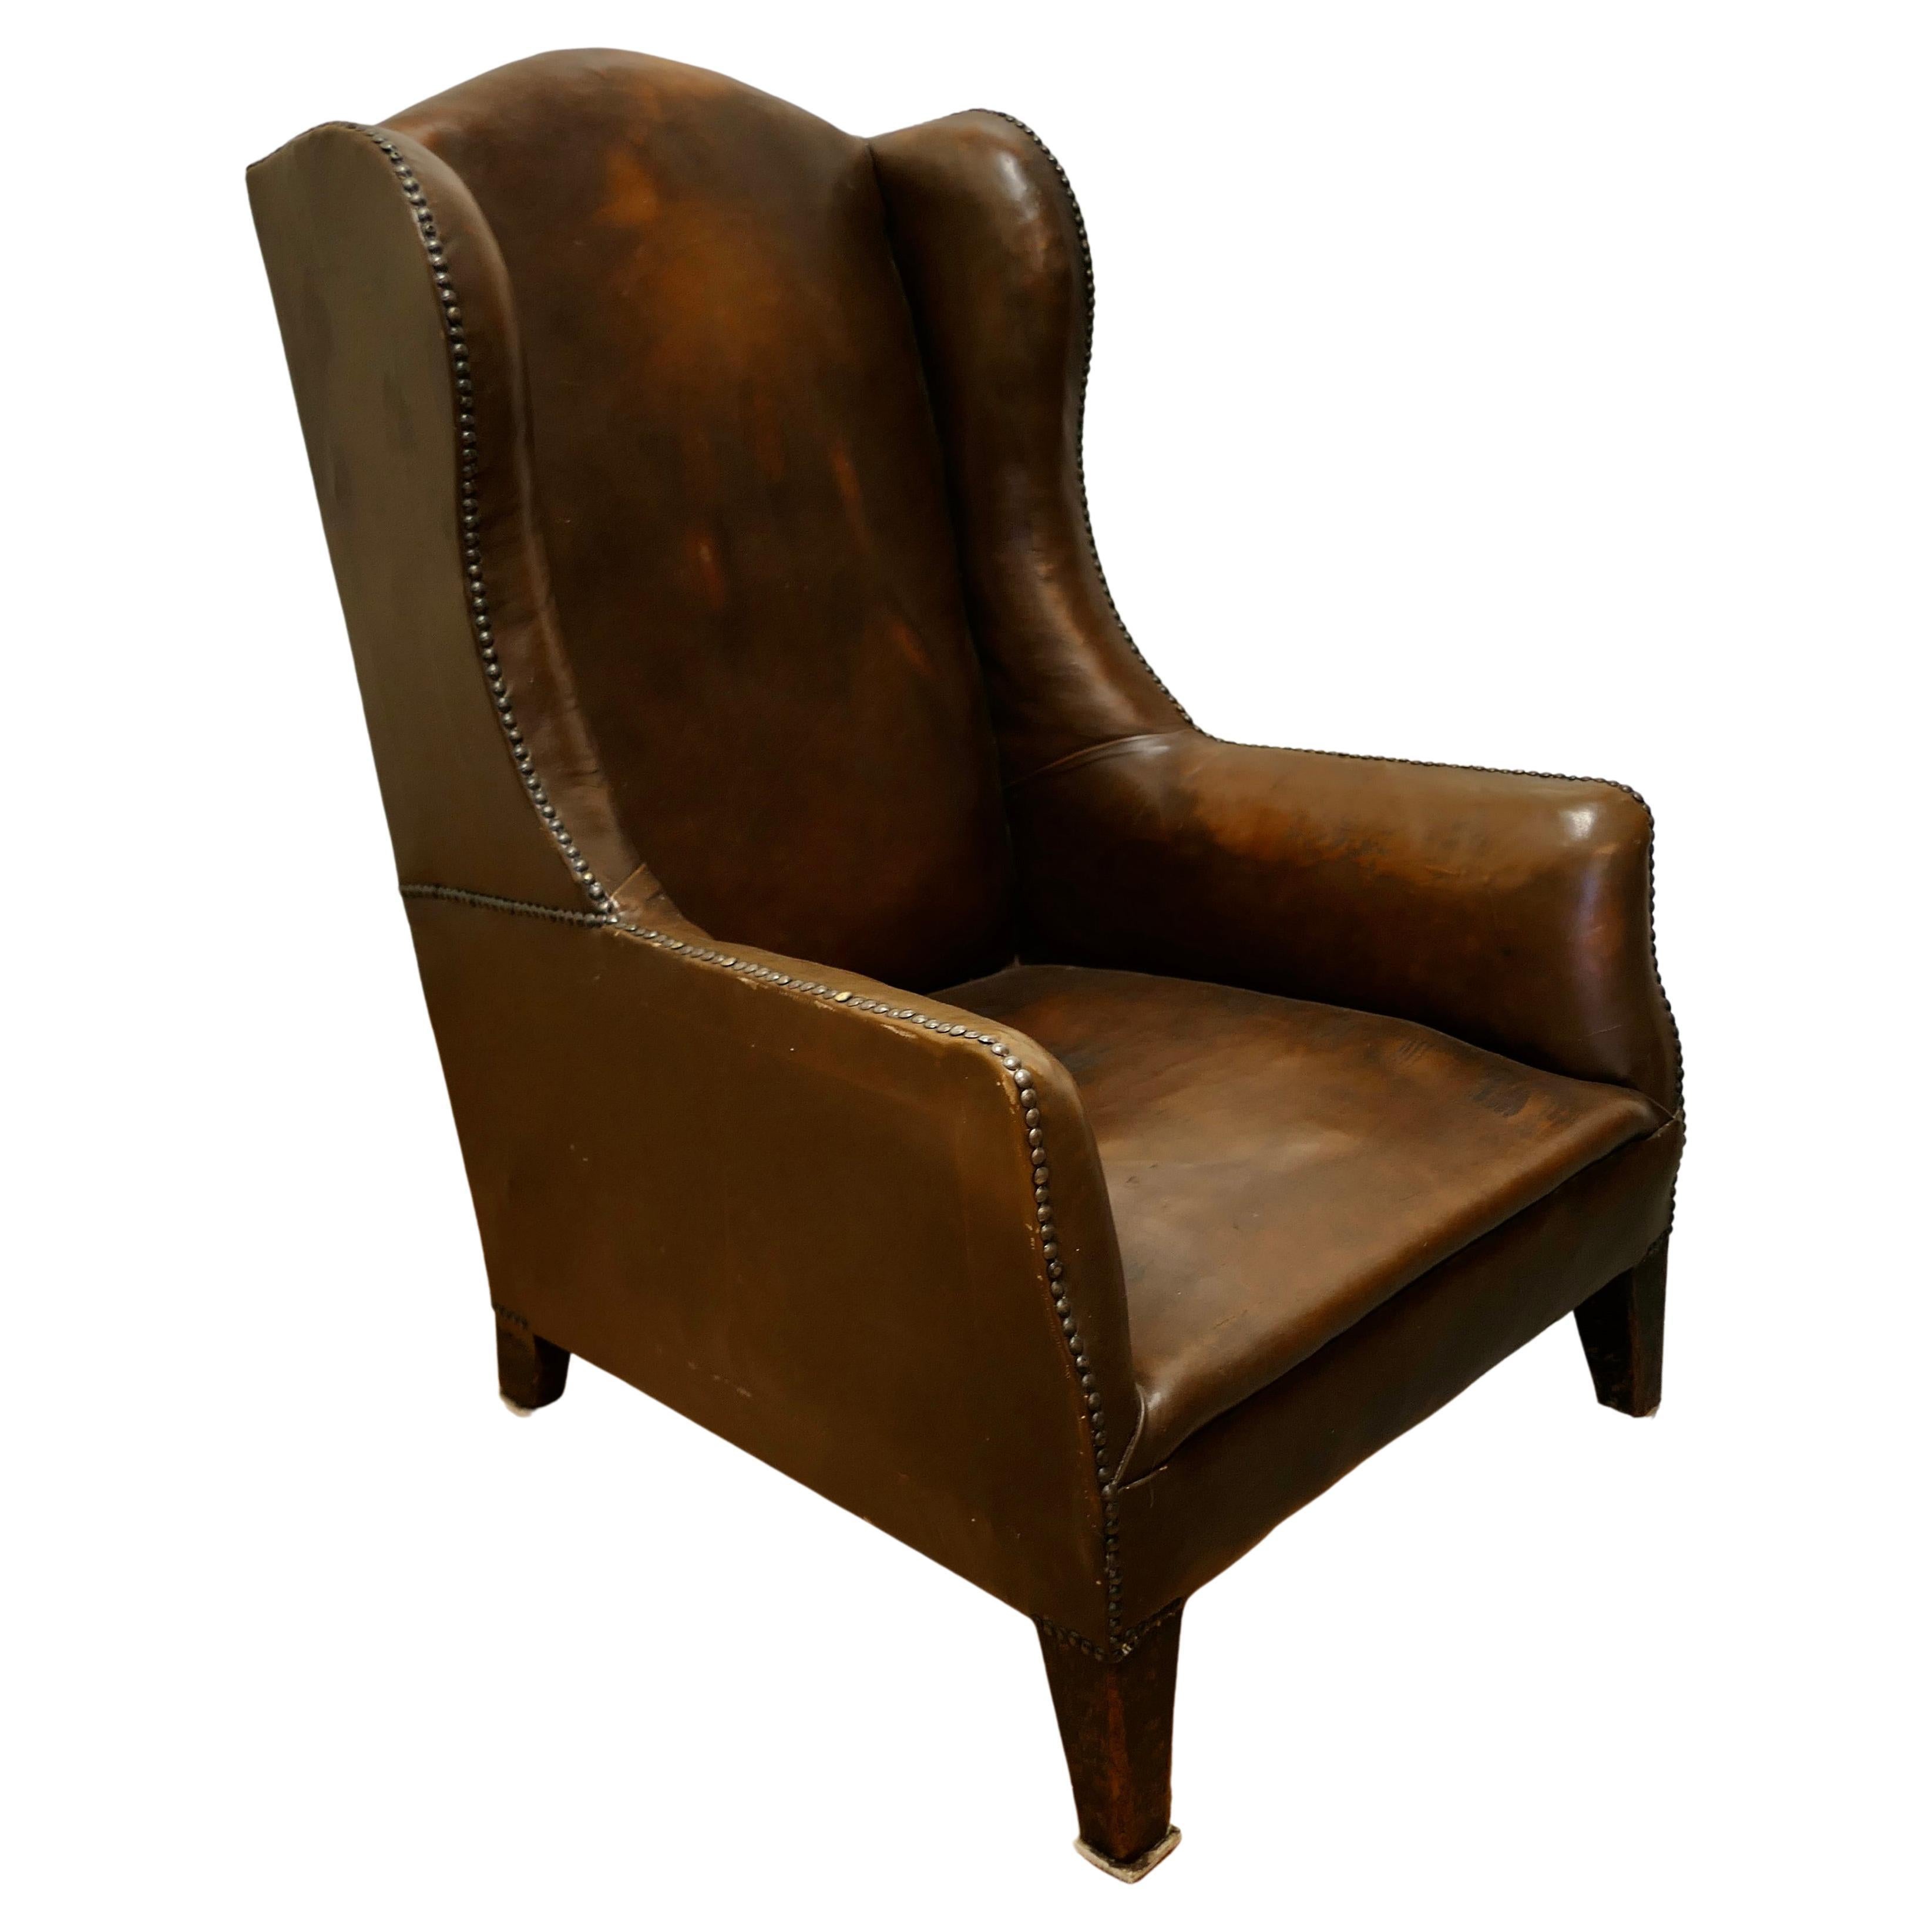 French Art Deco Wing Back Chair, in Dark Brown Leather